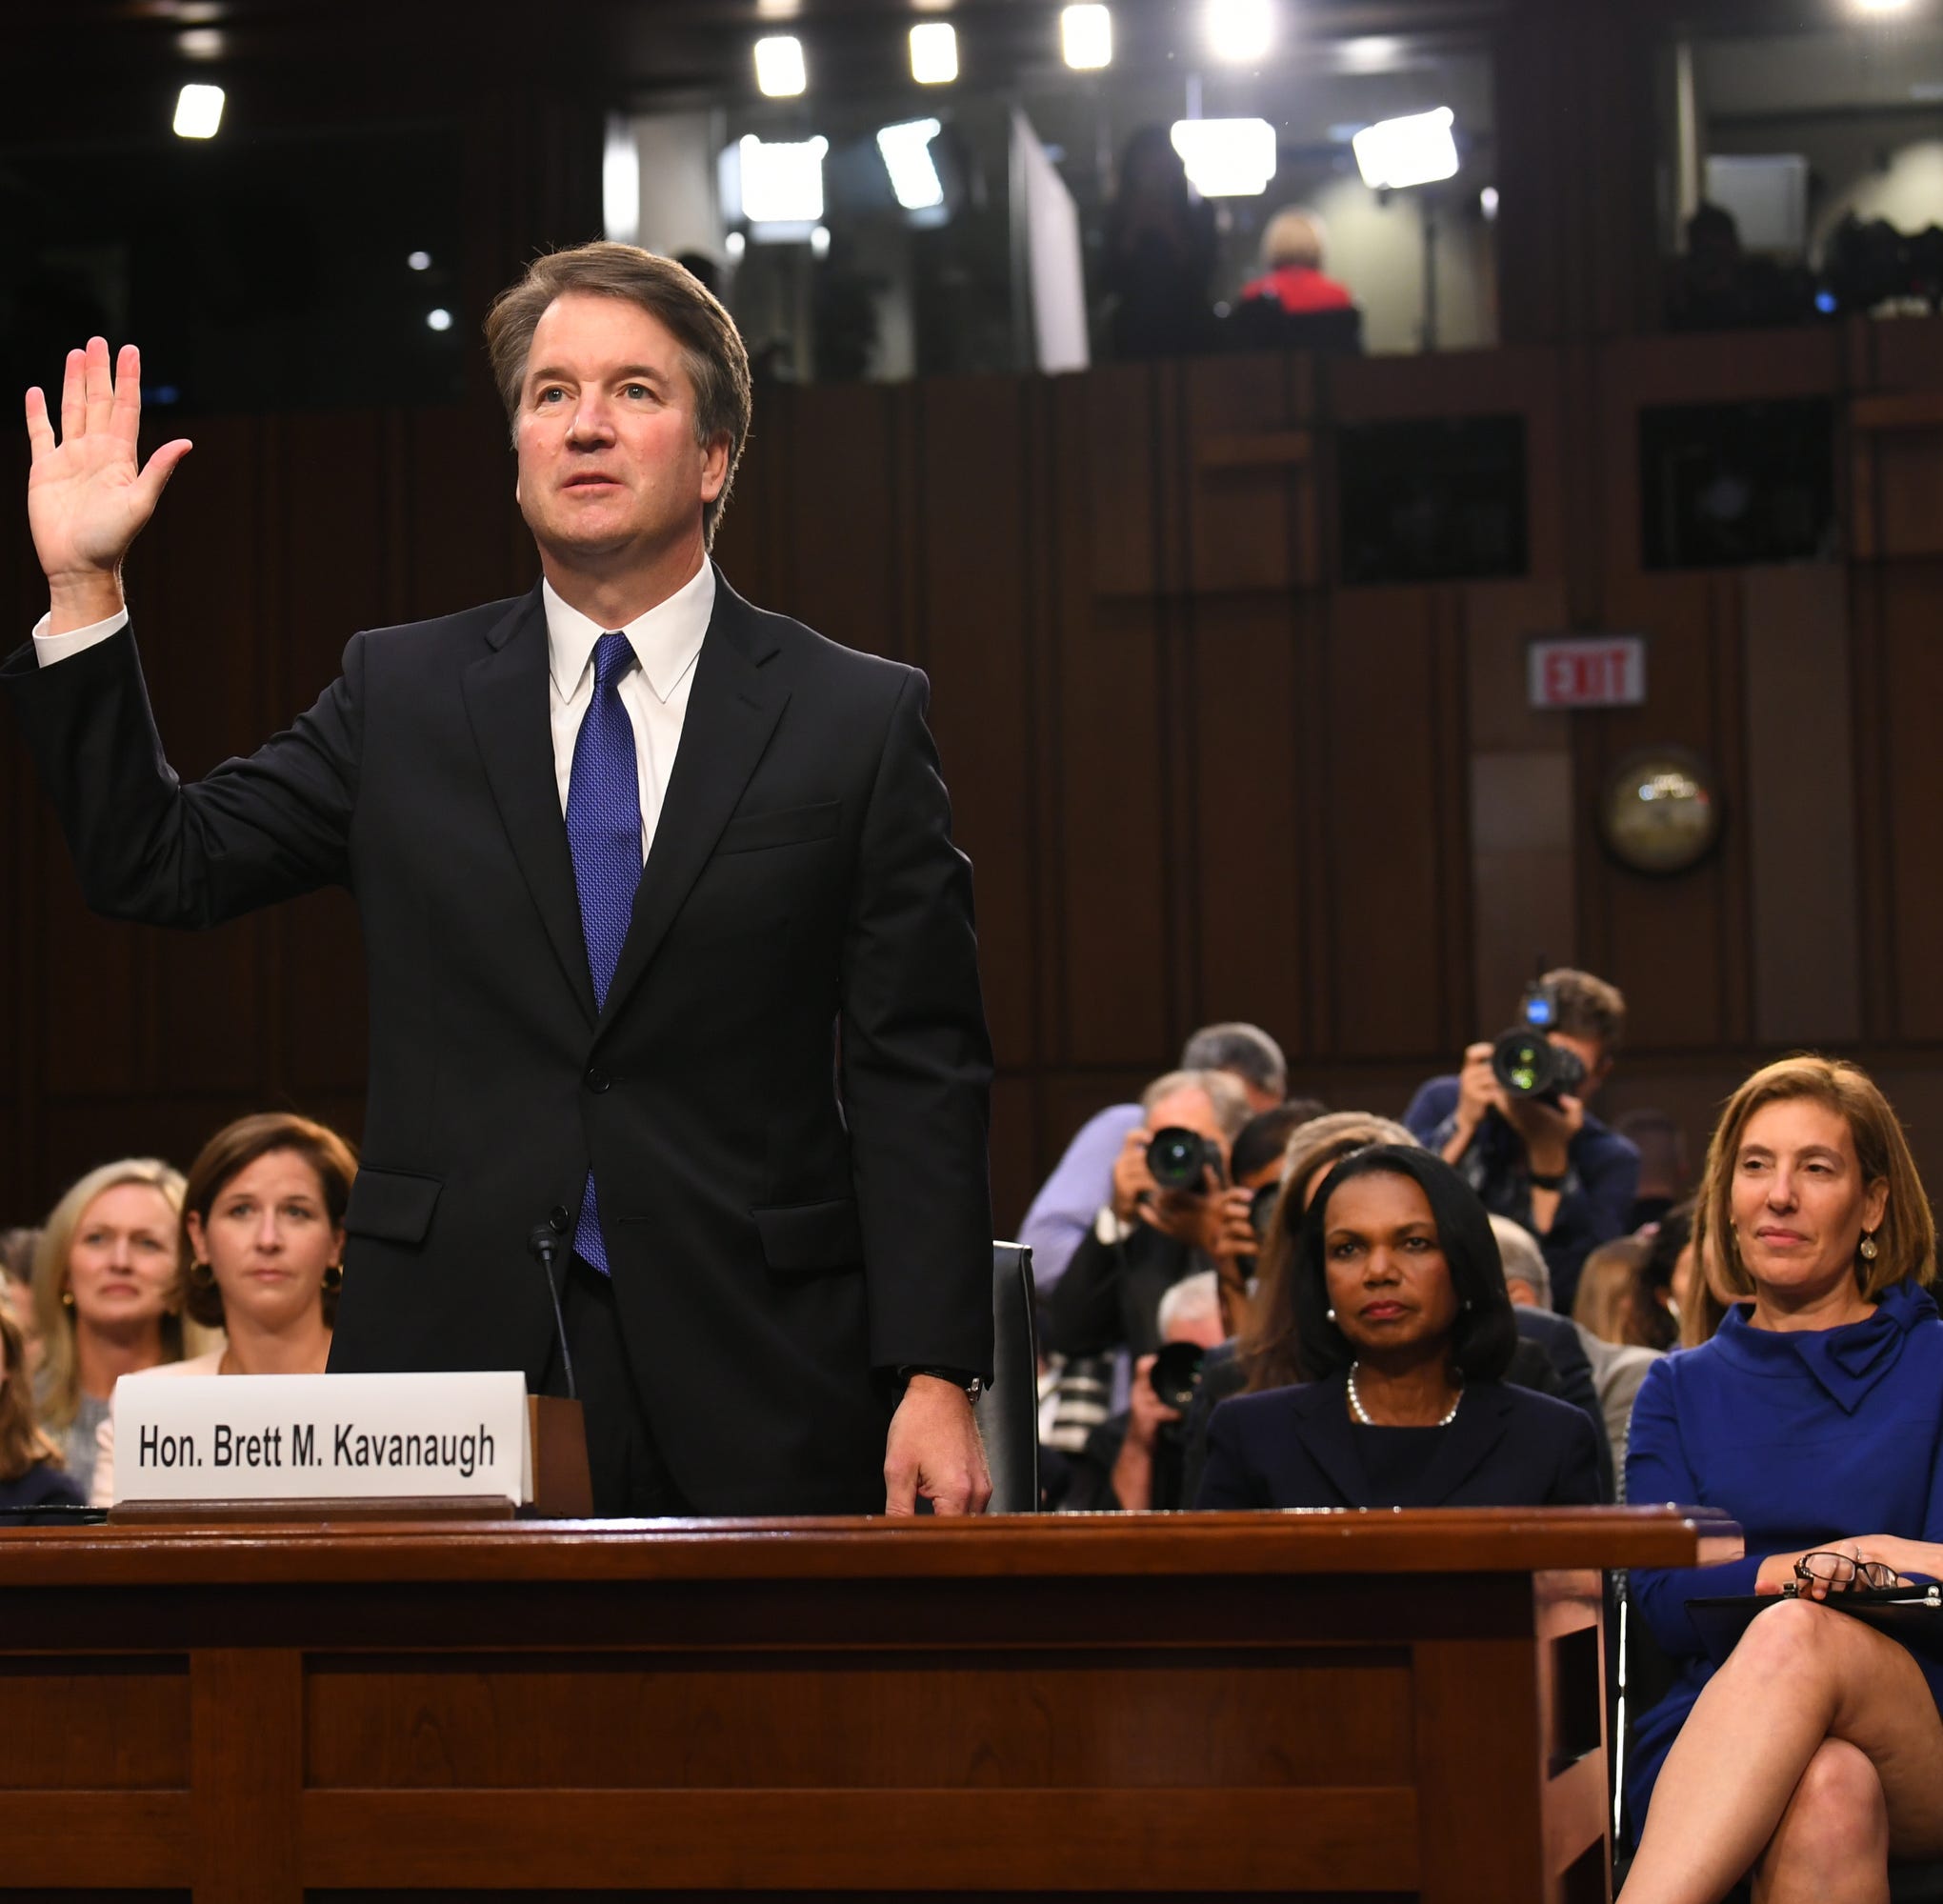 Supreme Court nominee Brett Kavanaugh is sworn in before the Senate Judiciary Committee during his confirmation hearing on Sept. 4, 2018.